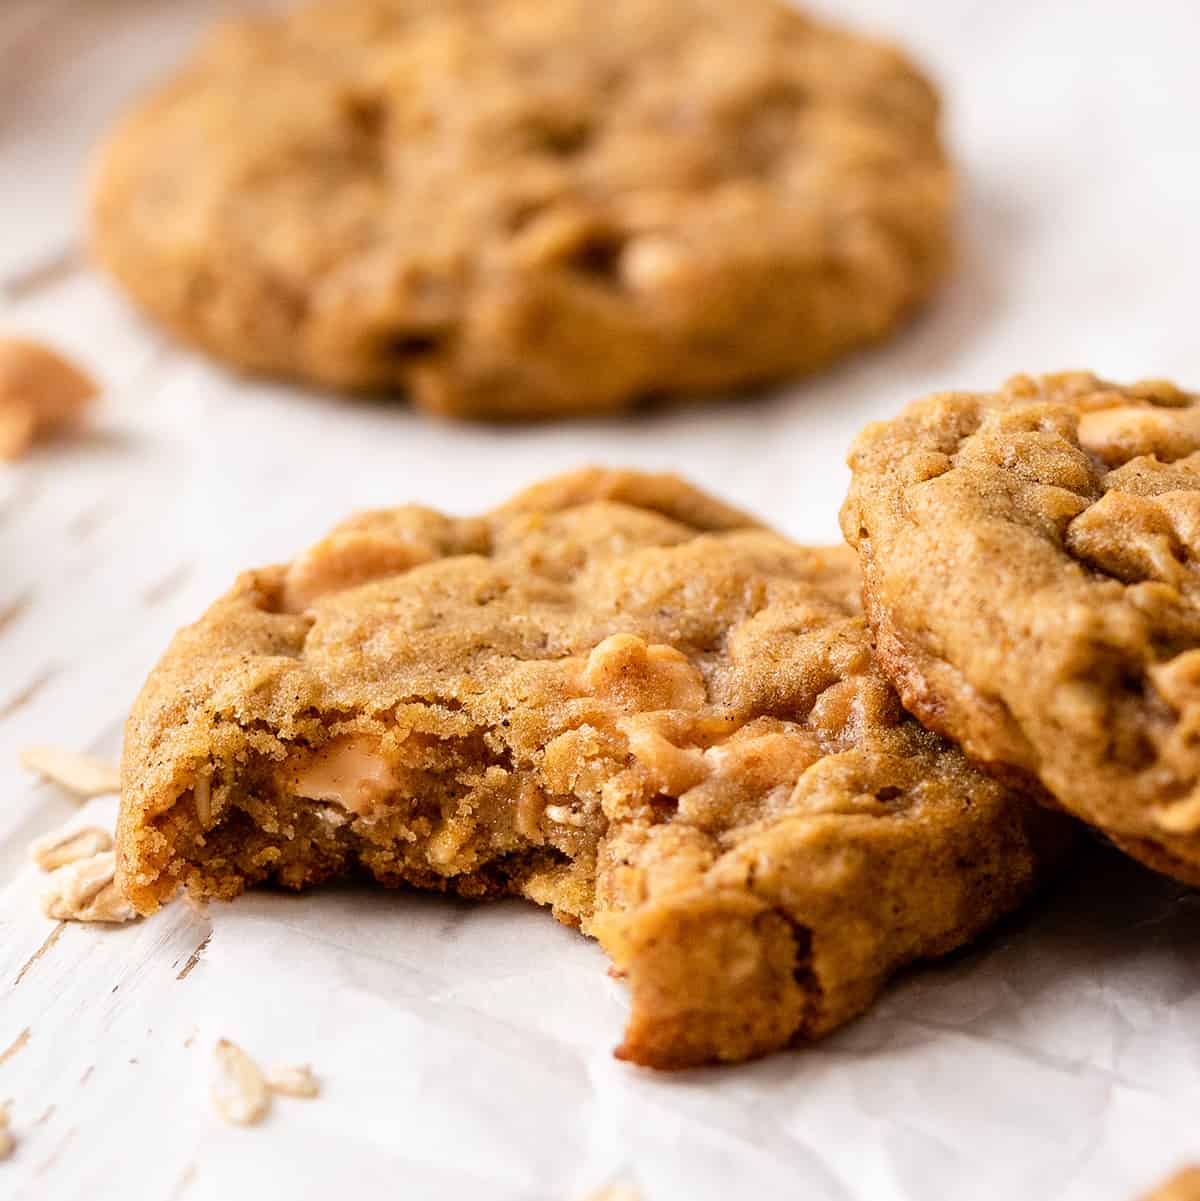 up close of a Pumpkin Oatmeal Cookie with a bite taken out of it